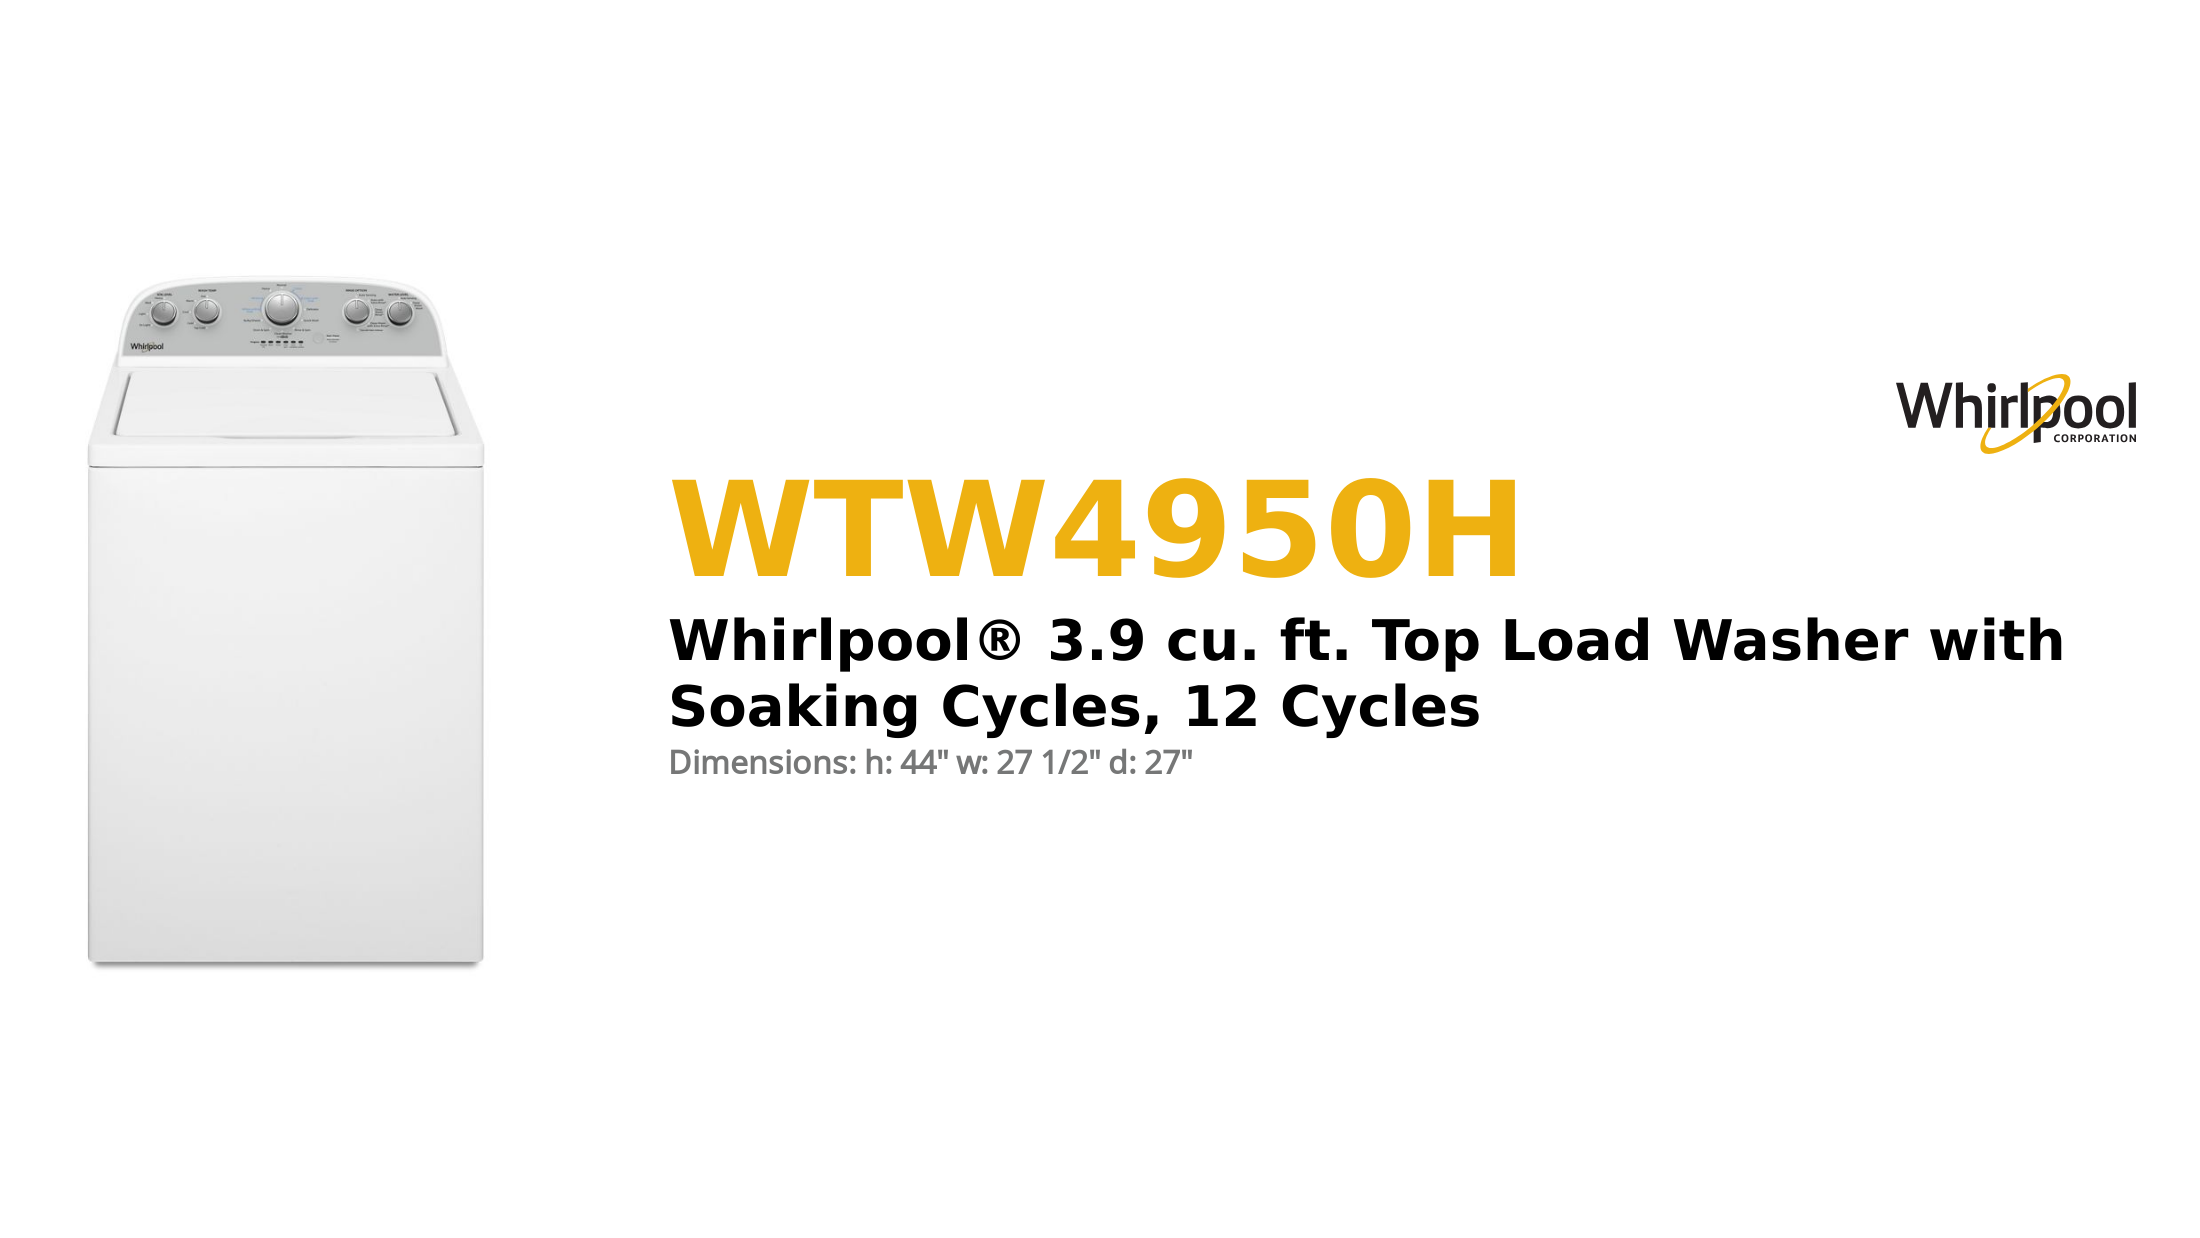 Whirlpool Top Load Washer - WTW4950HW Product Brief